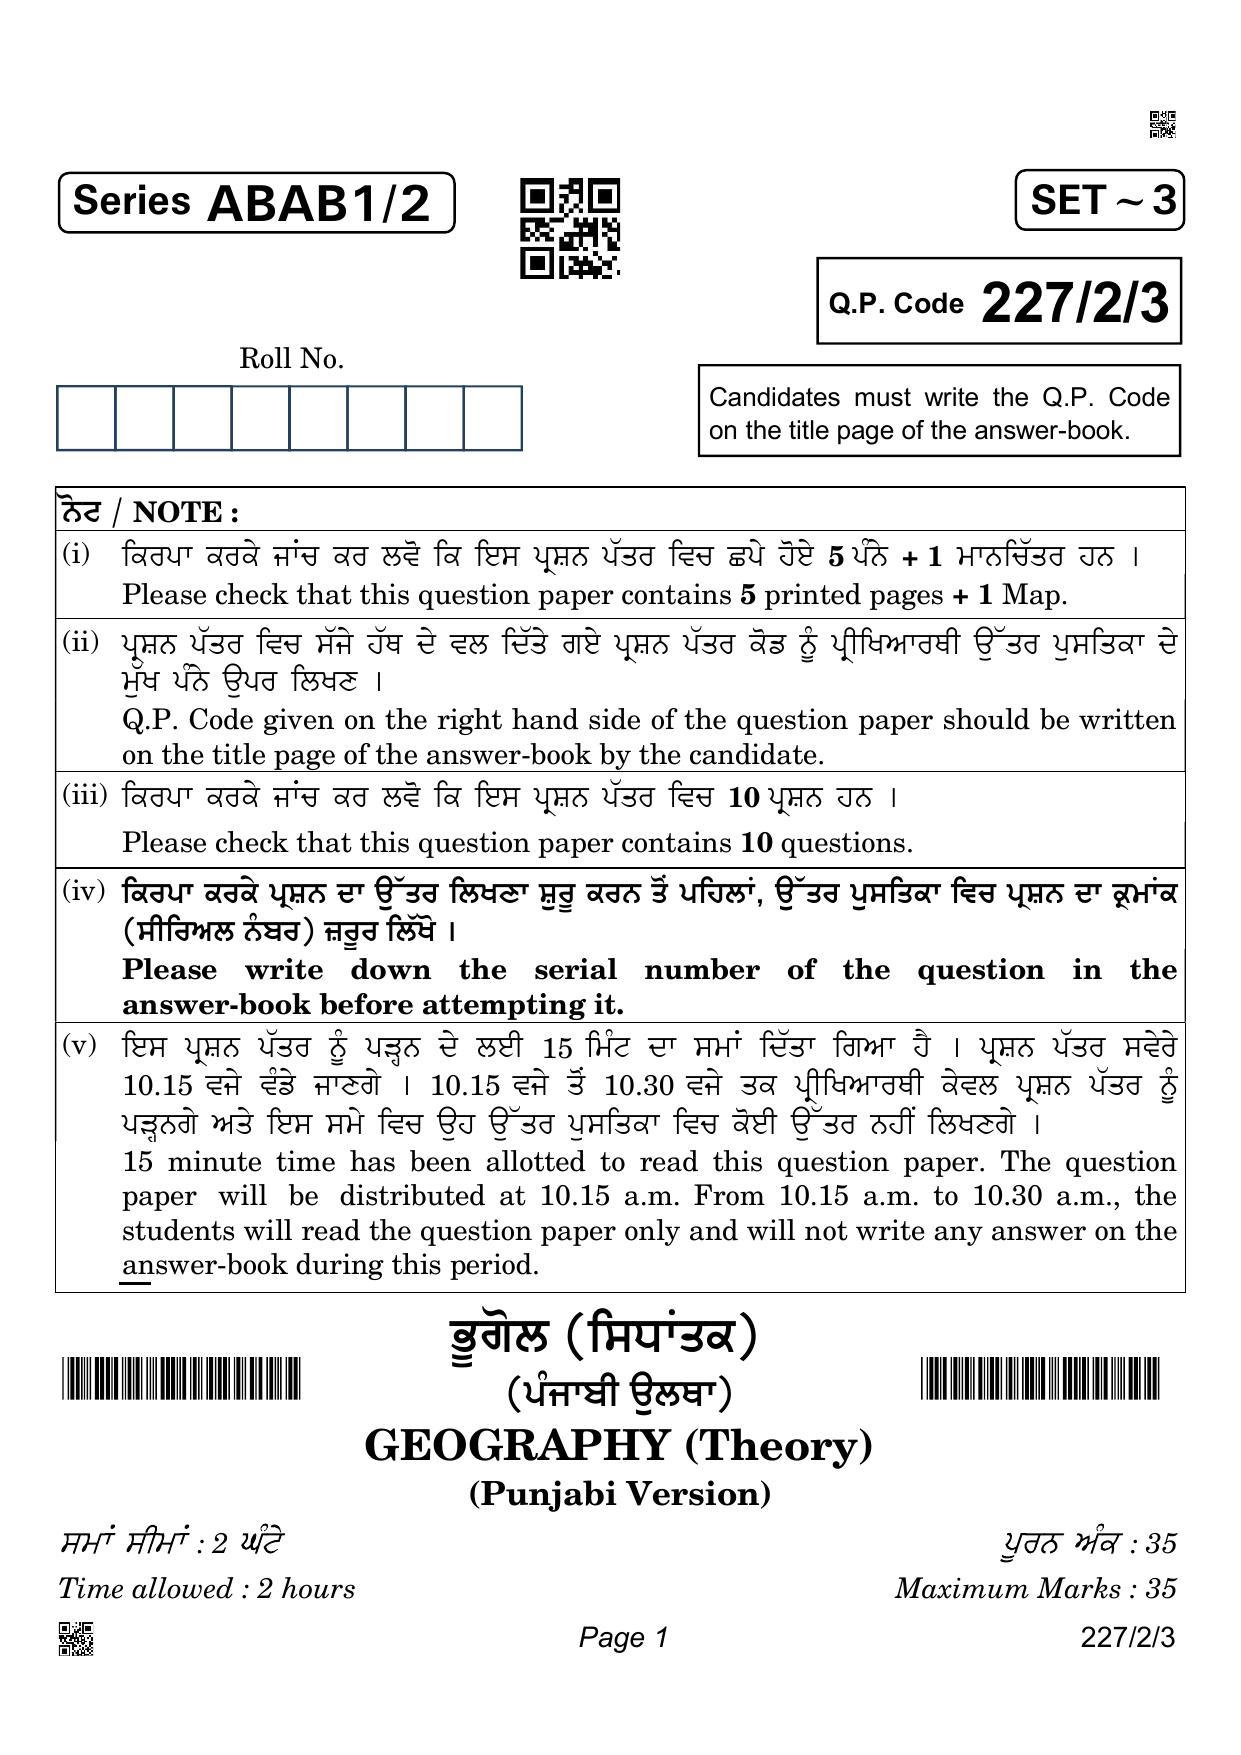 CBSE Class 12 227-2-3 Geography  Punjabi Version 2022 Question Paper - Page 1